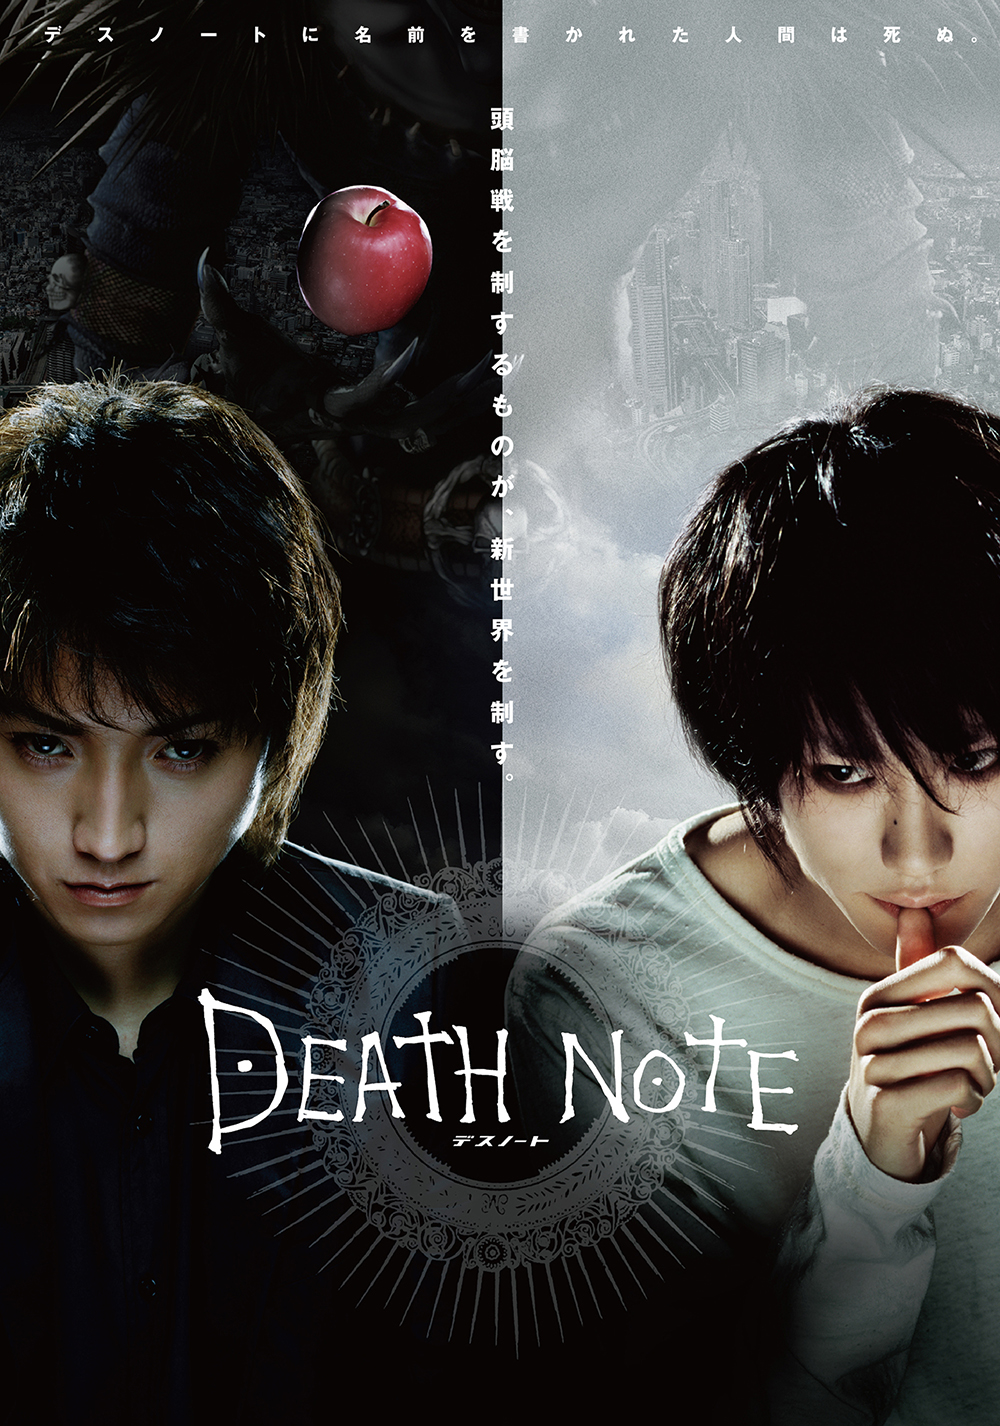 death note movie review essay